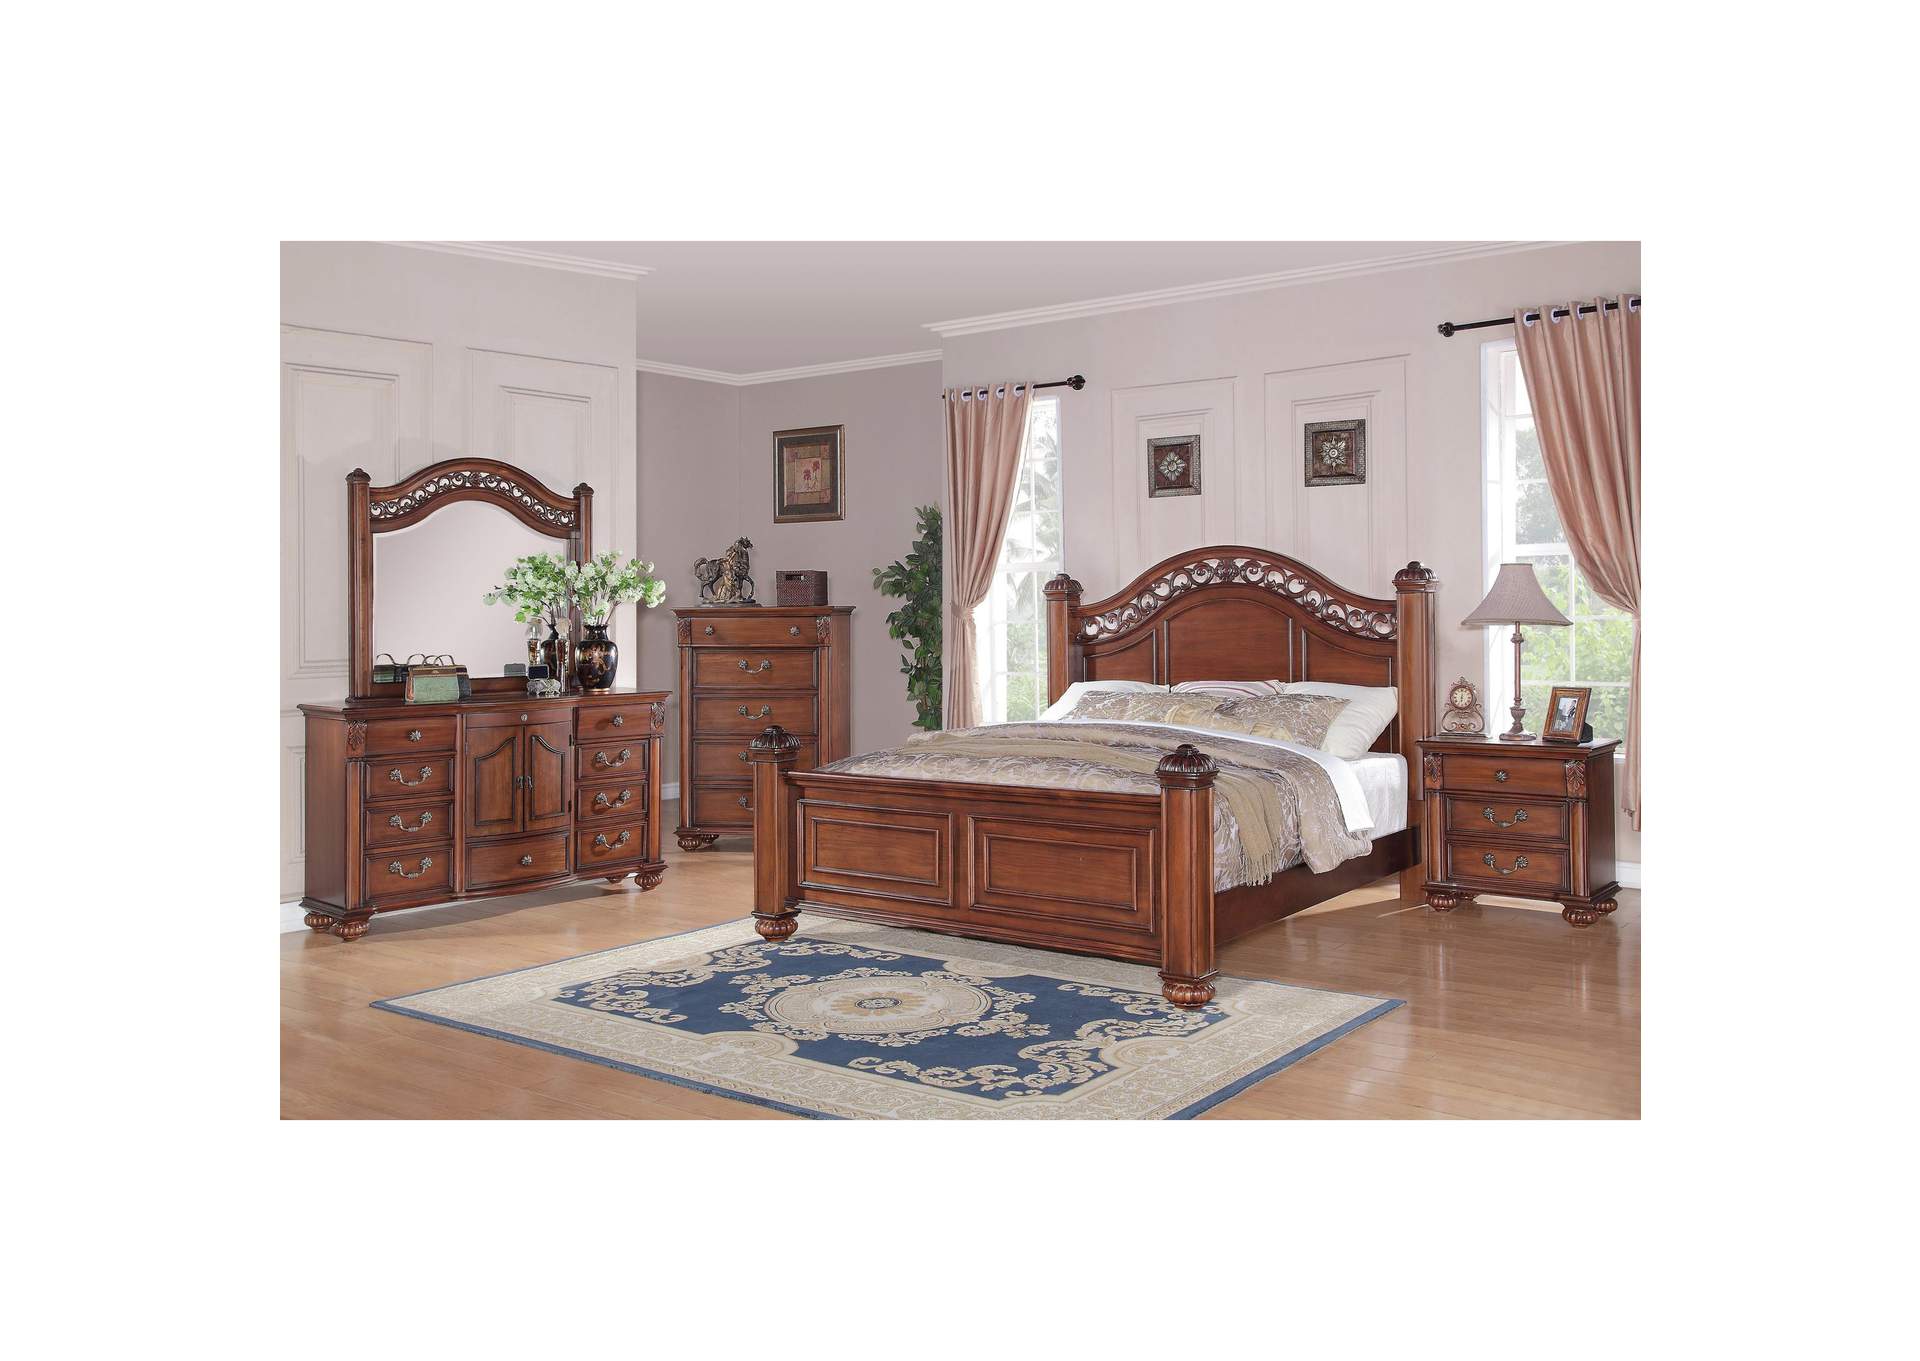 Barkley Square Queen Bed,Elements